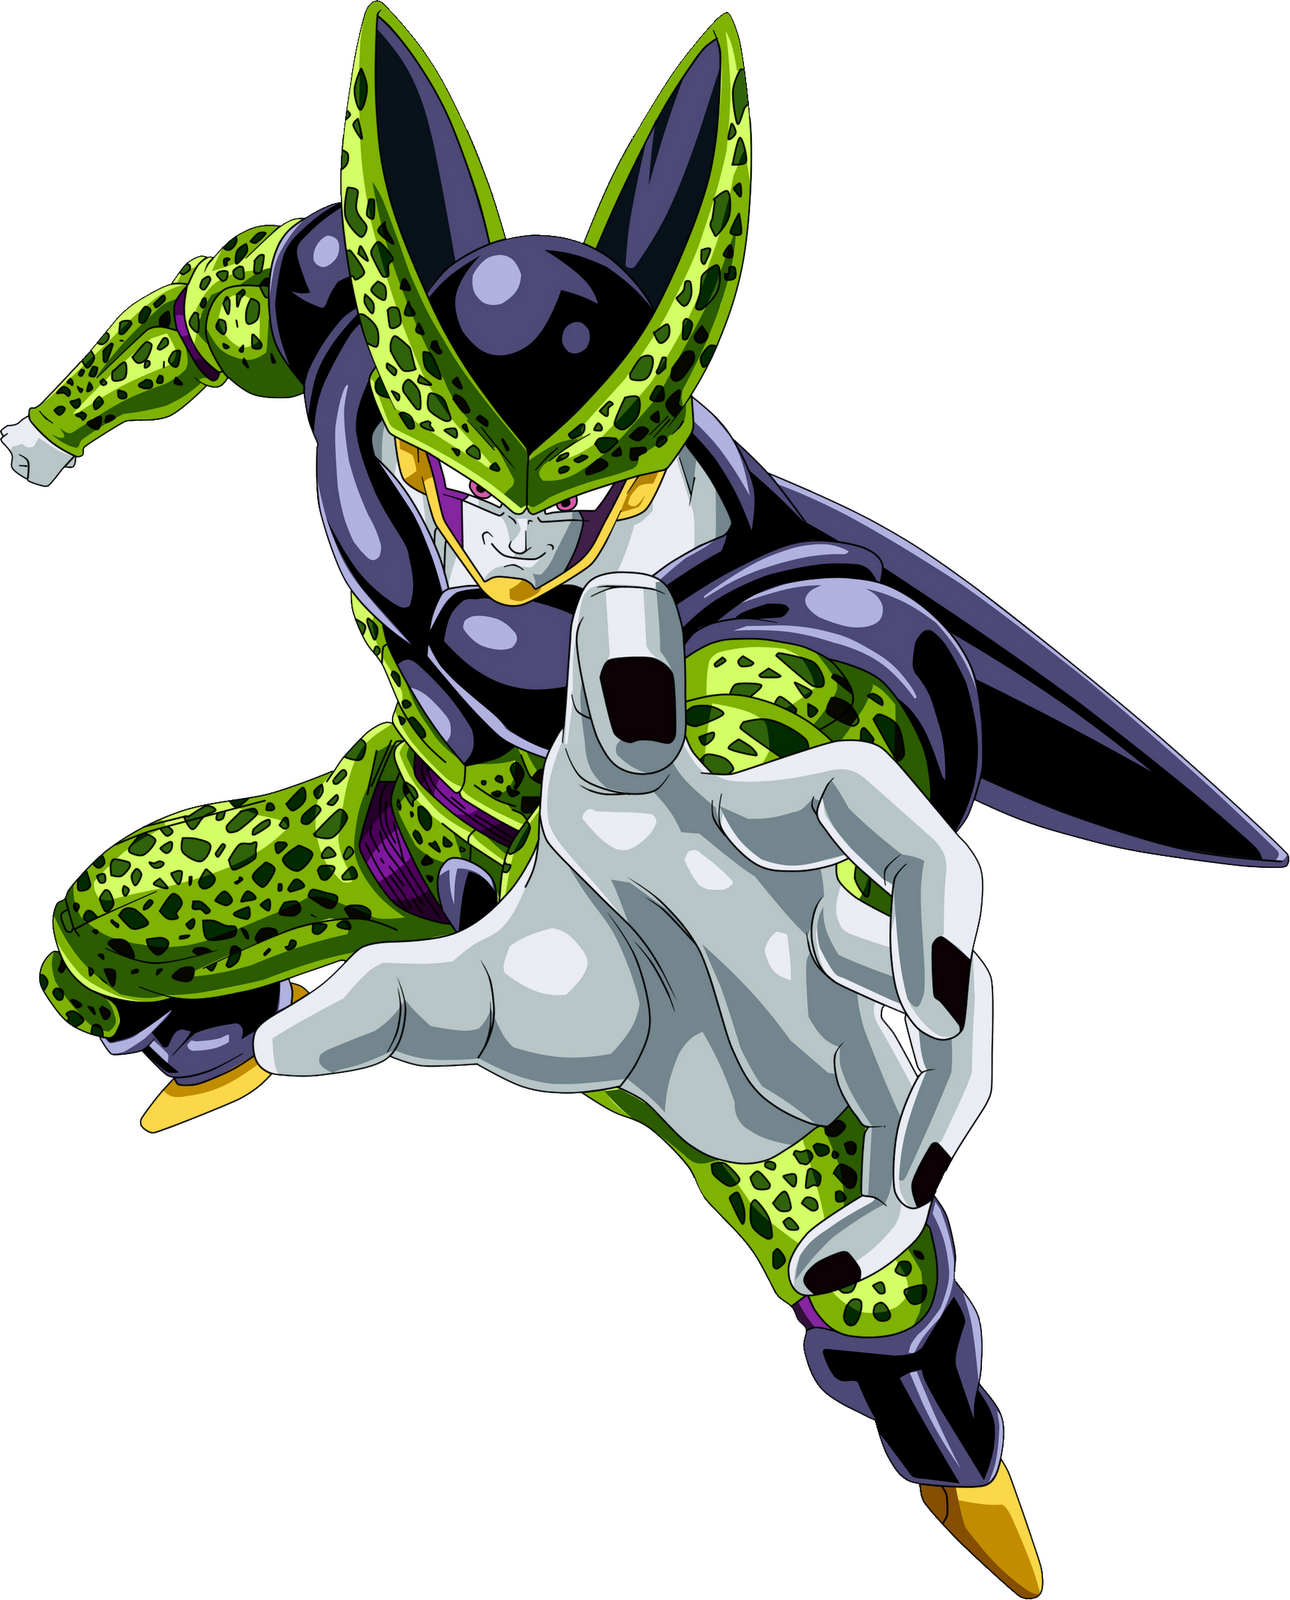 the first cell raza